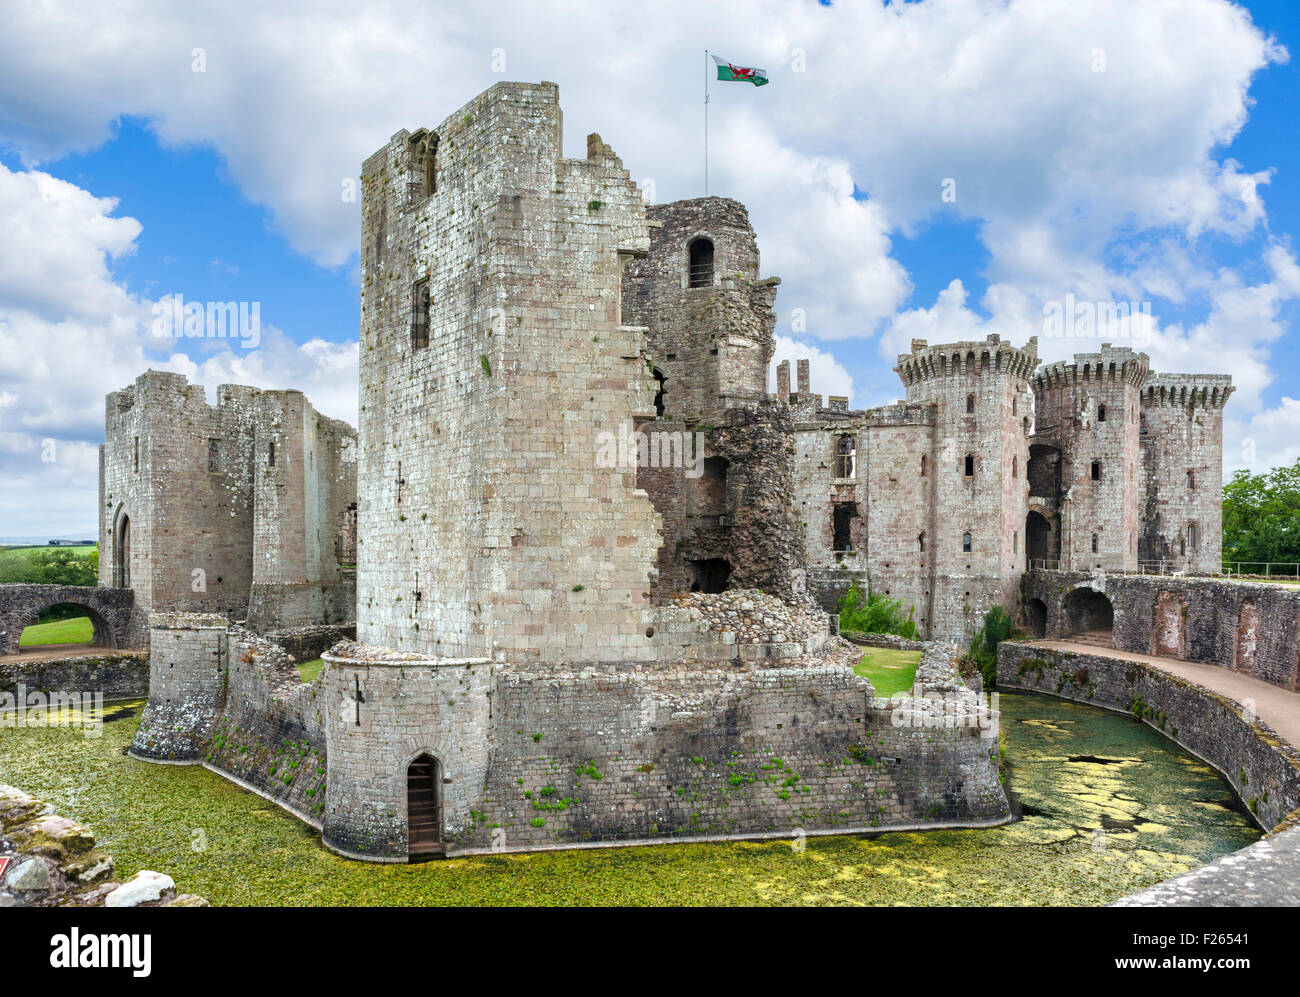 The ruins of Raglan Castle, Chepstow, Monmouthshire, Wales, UK Stock Photo